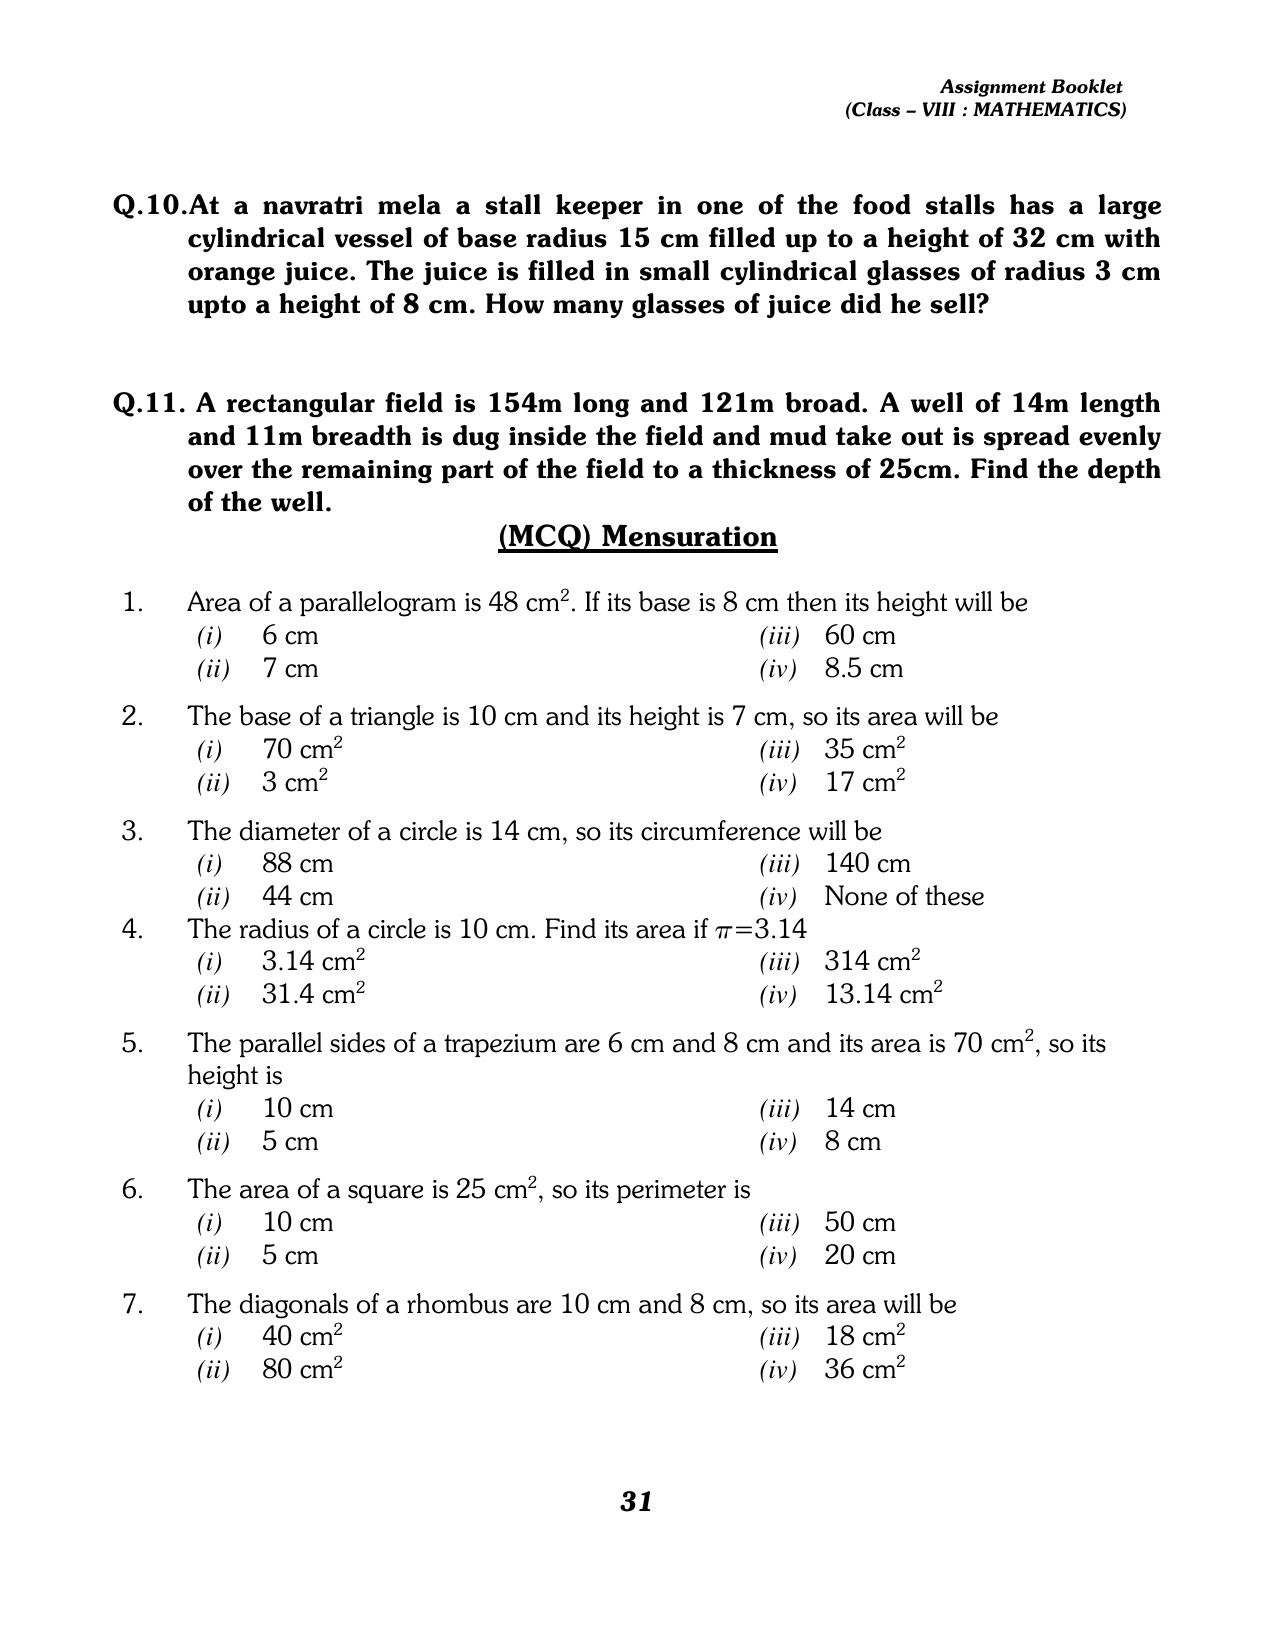 CBSE Worksheets for Class 8 Mathematics Assignment 13 - Page 21